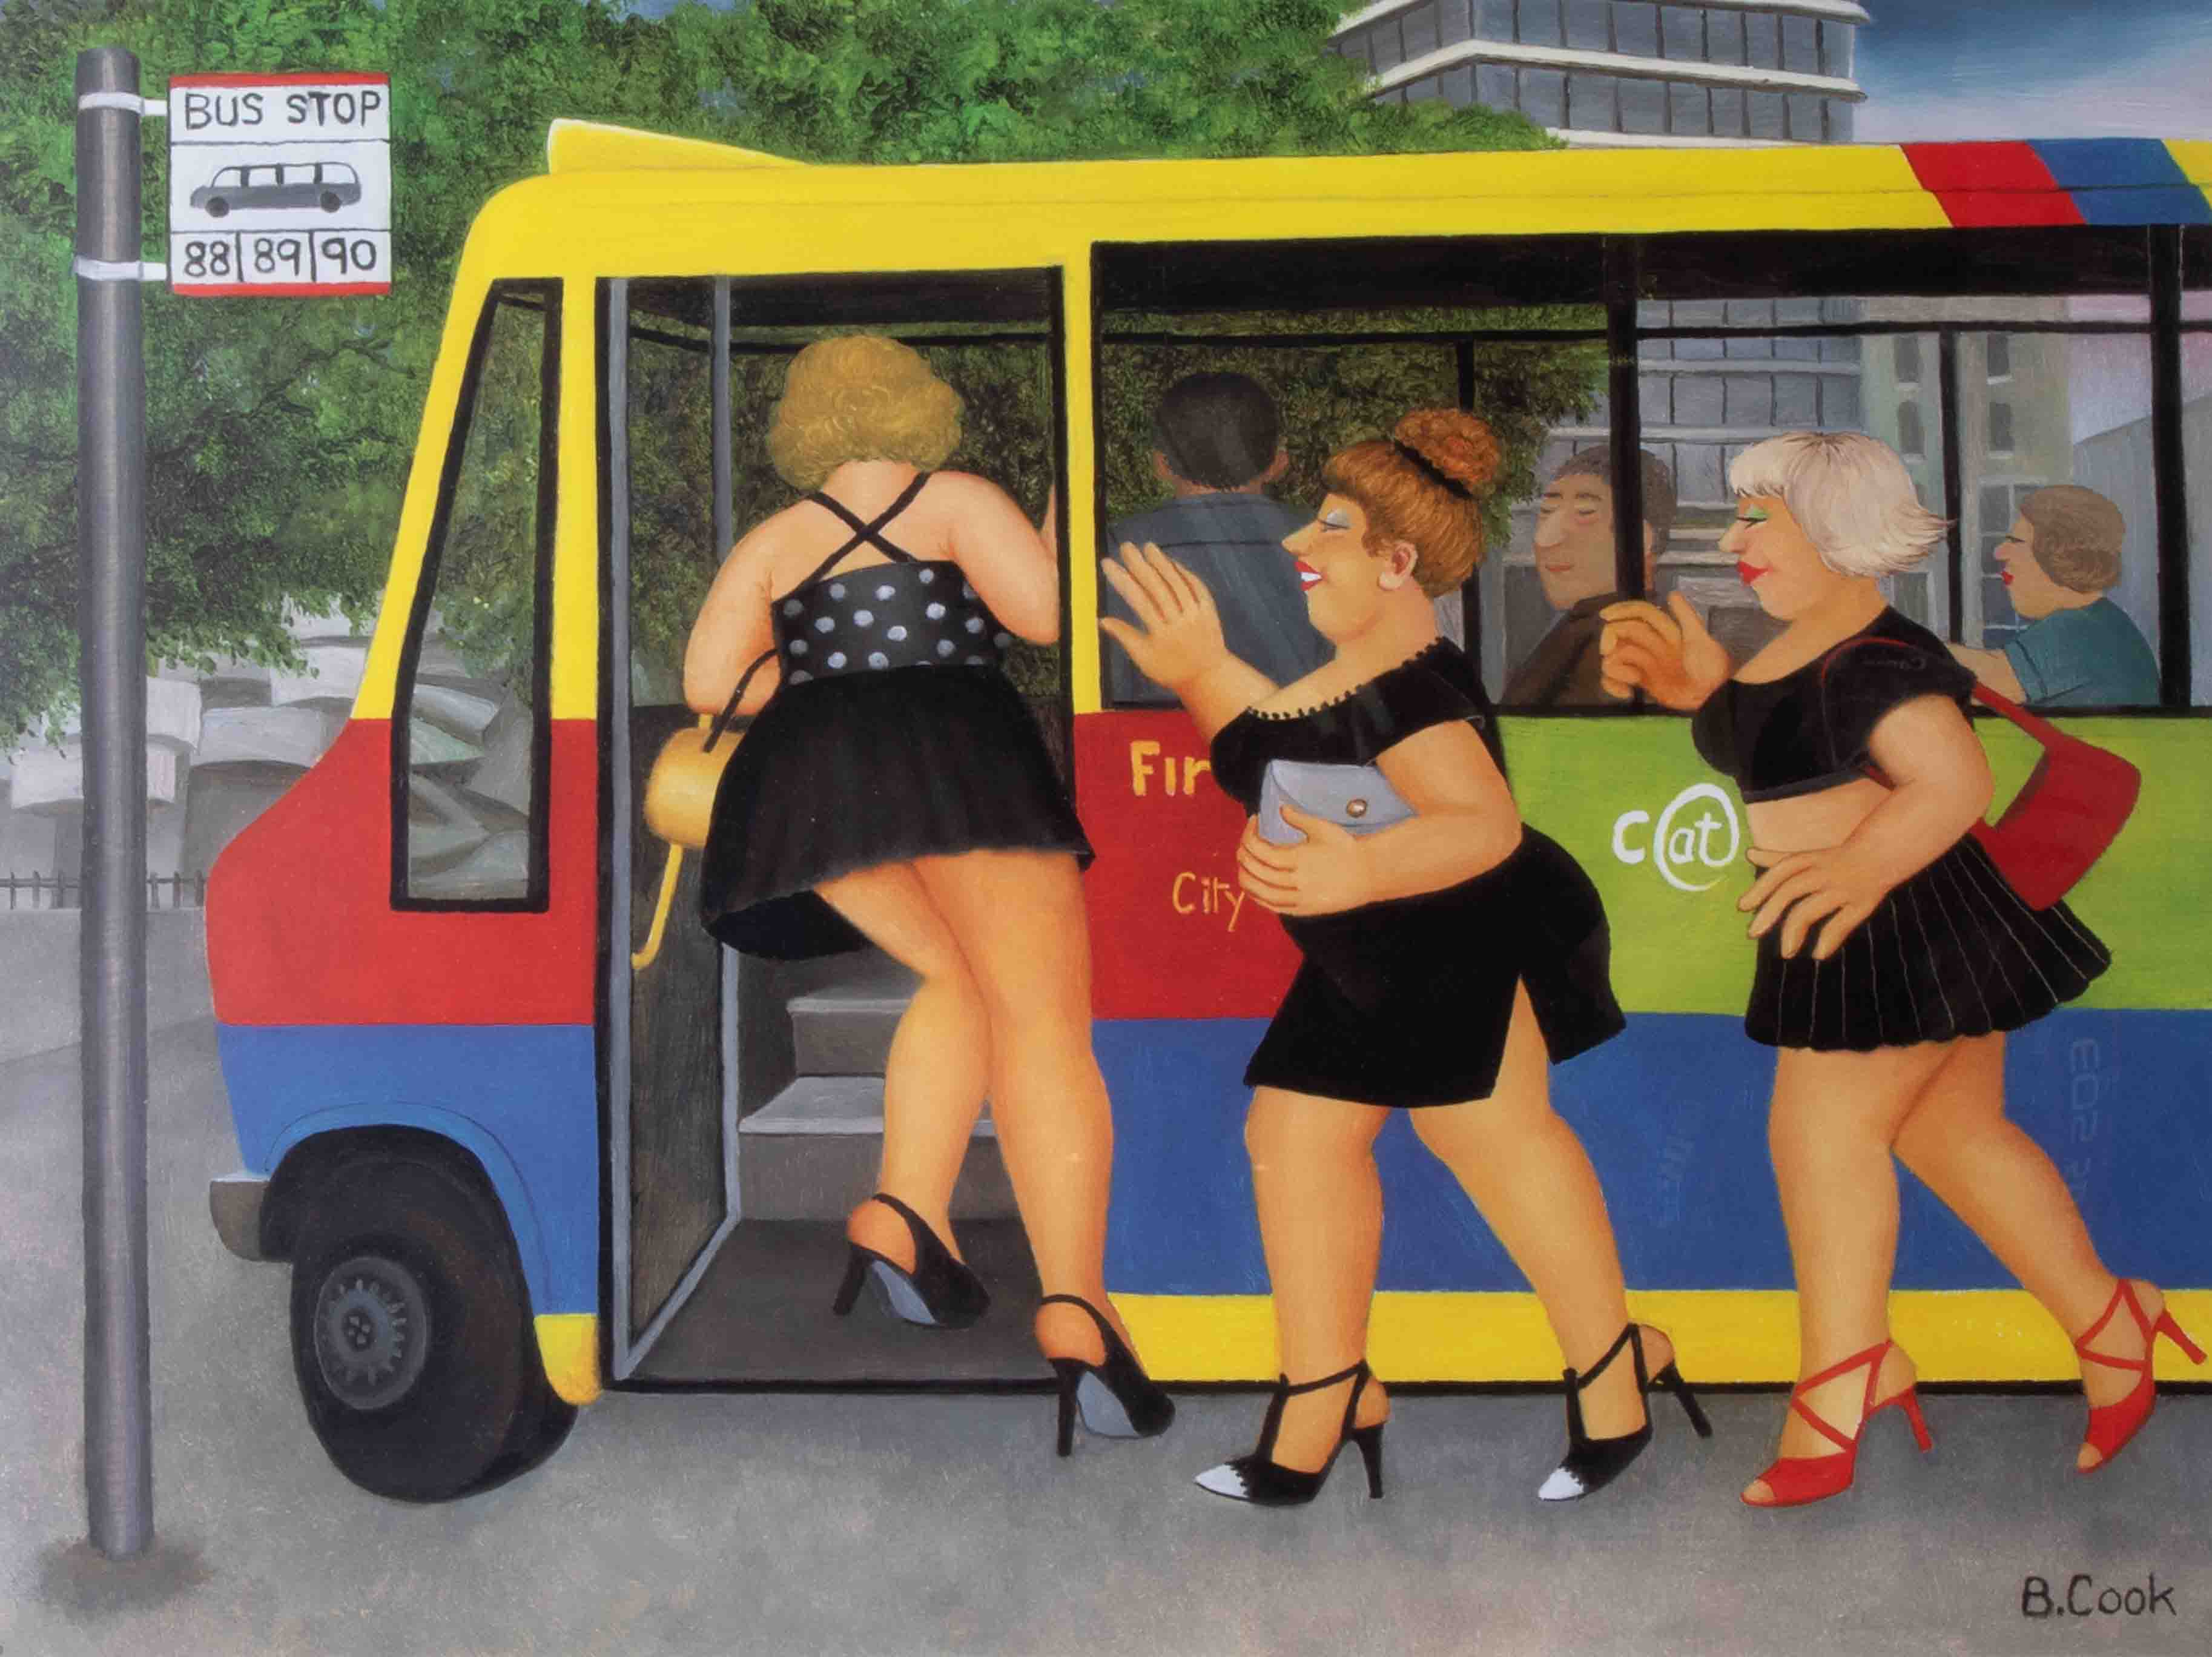 Beryl Cook (1926-2008) 'Bus Stop' 2006 screen print, signed and published by Alexander Gallery - Image 2 of 2